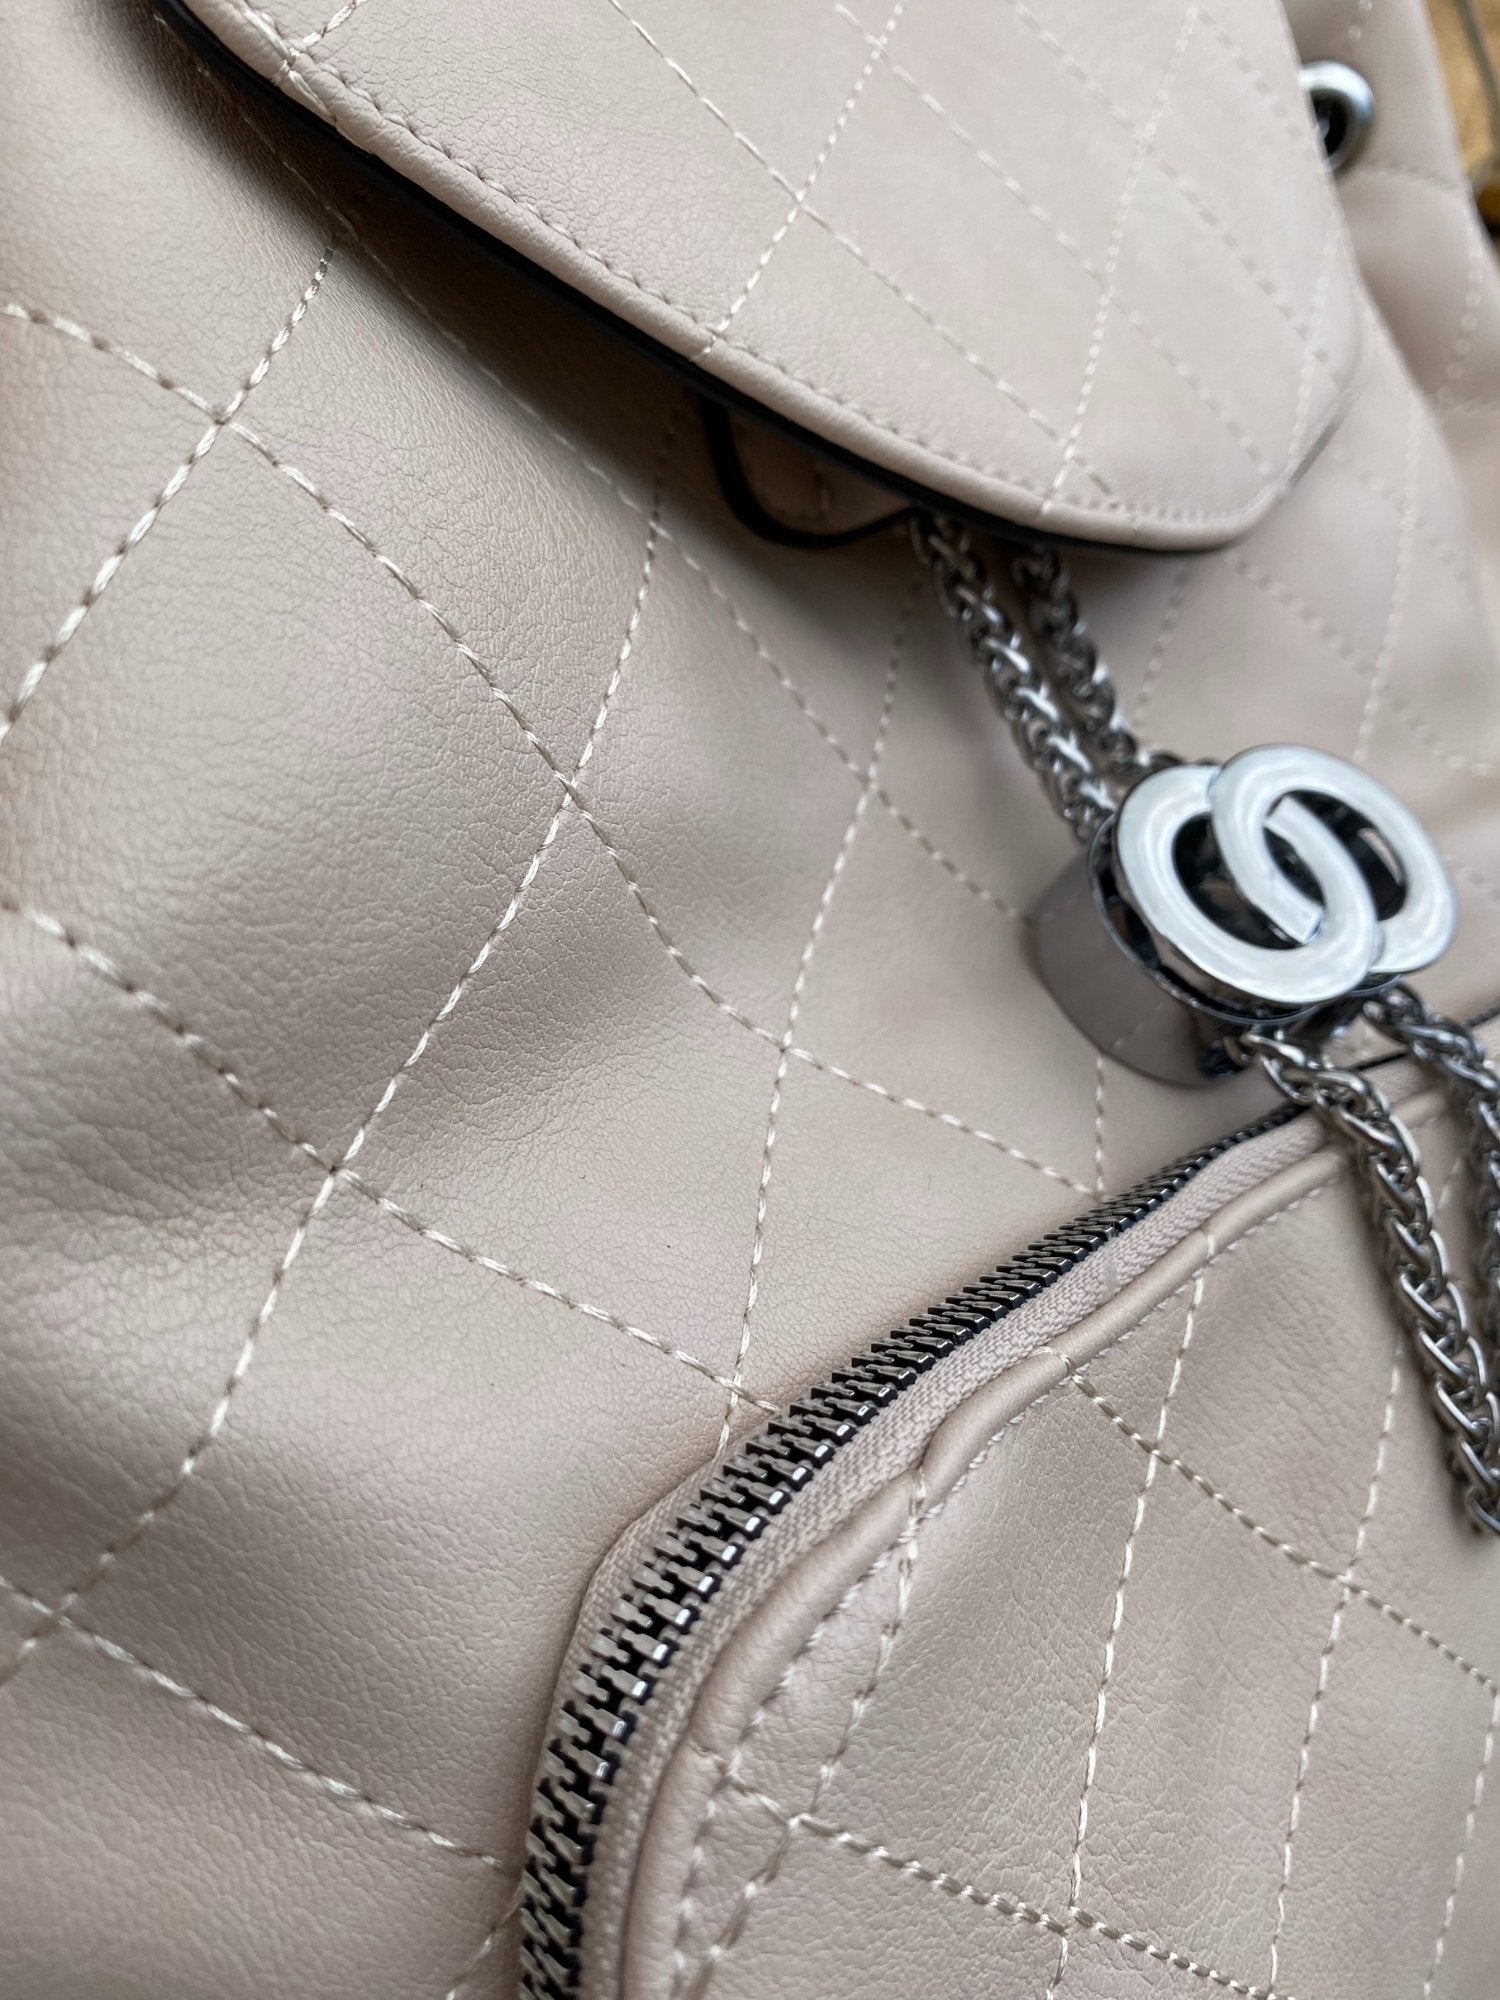 Cream Vegan Leather Backpack close up of stitching